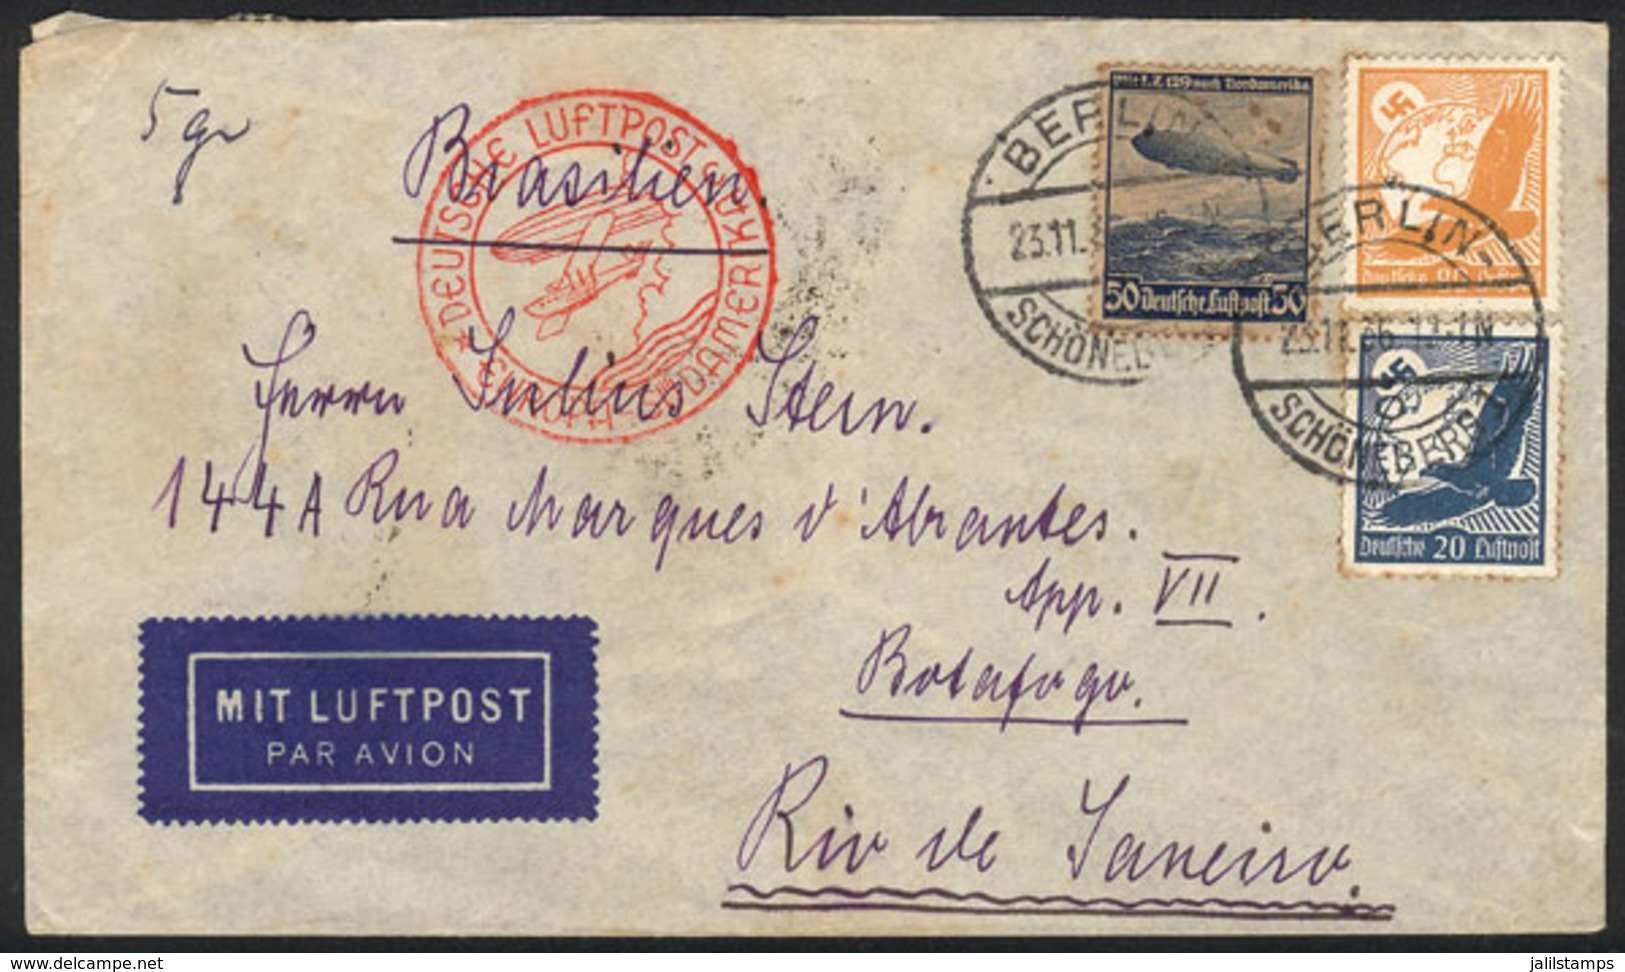 GERMANY: Airmail Cover Sent From Berlin To Rio De Janeiro On 23/NO/1936 Franked With 1.50Mk., Attractive! - Covers & Documents